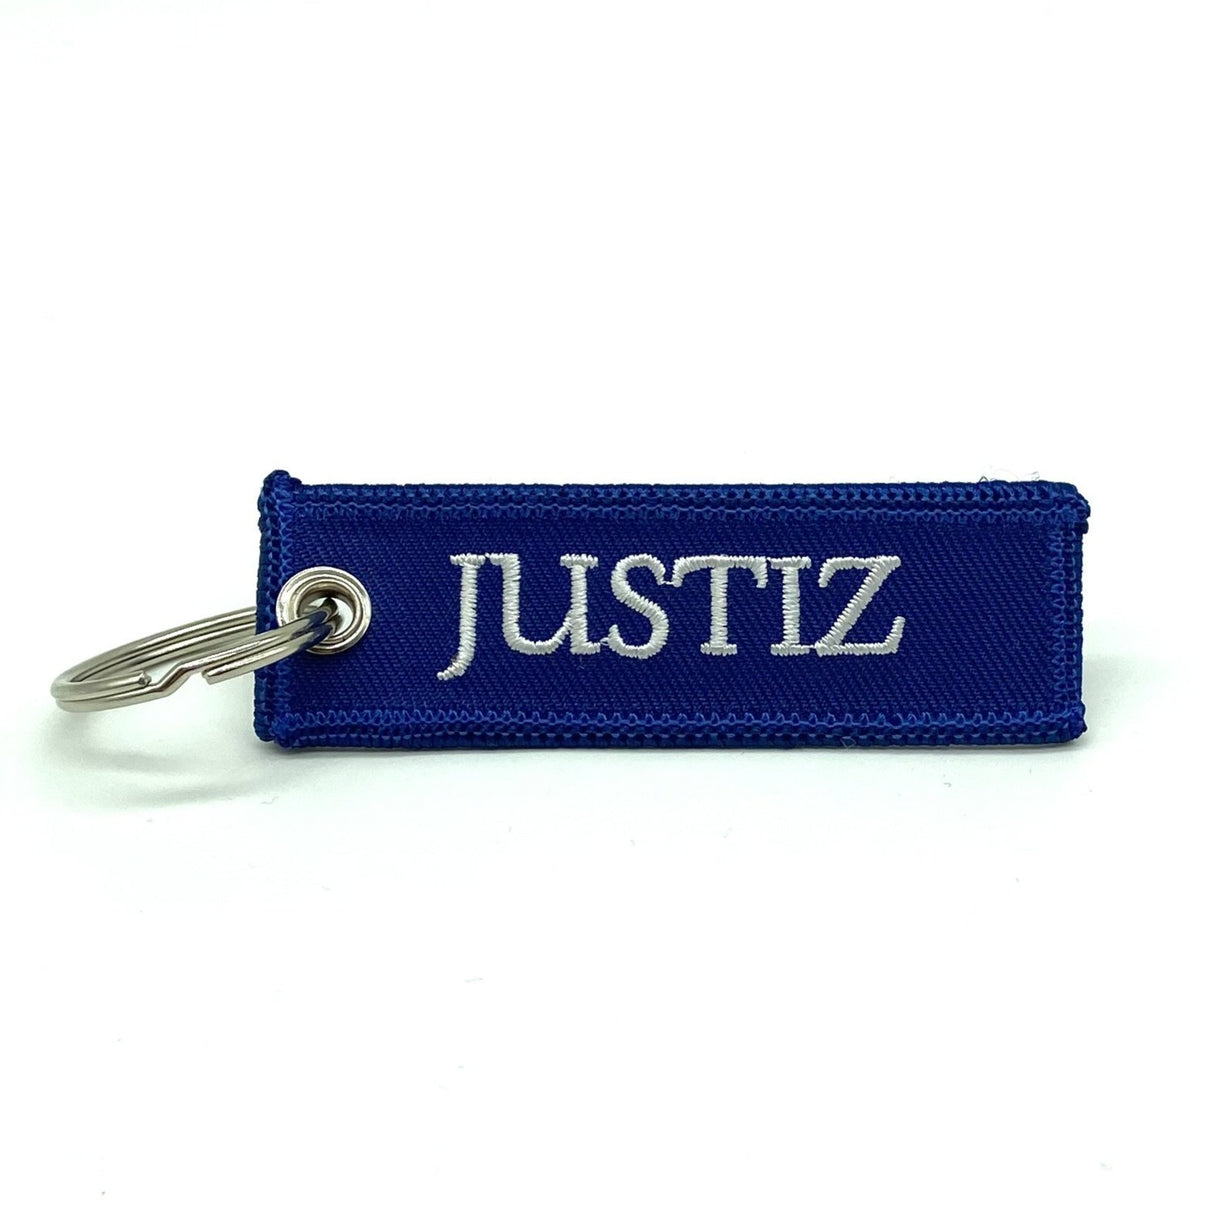 Justice keychain textile